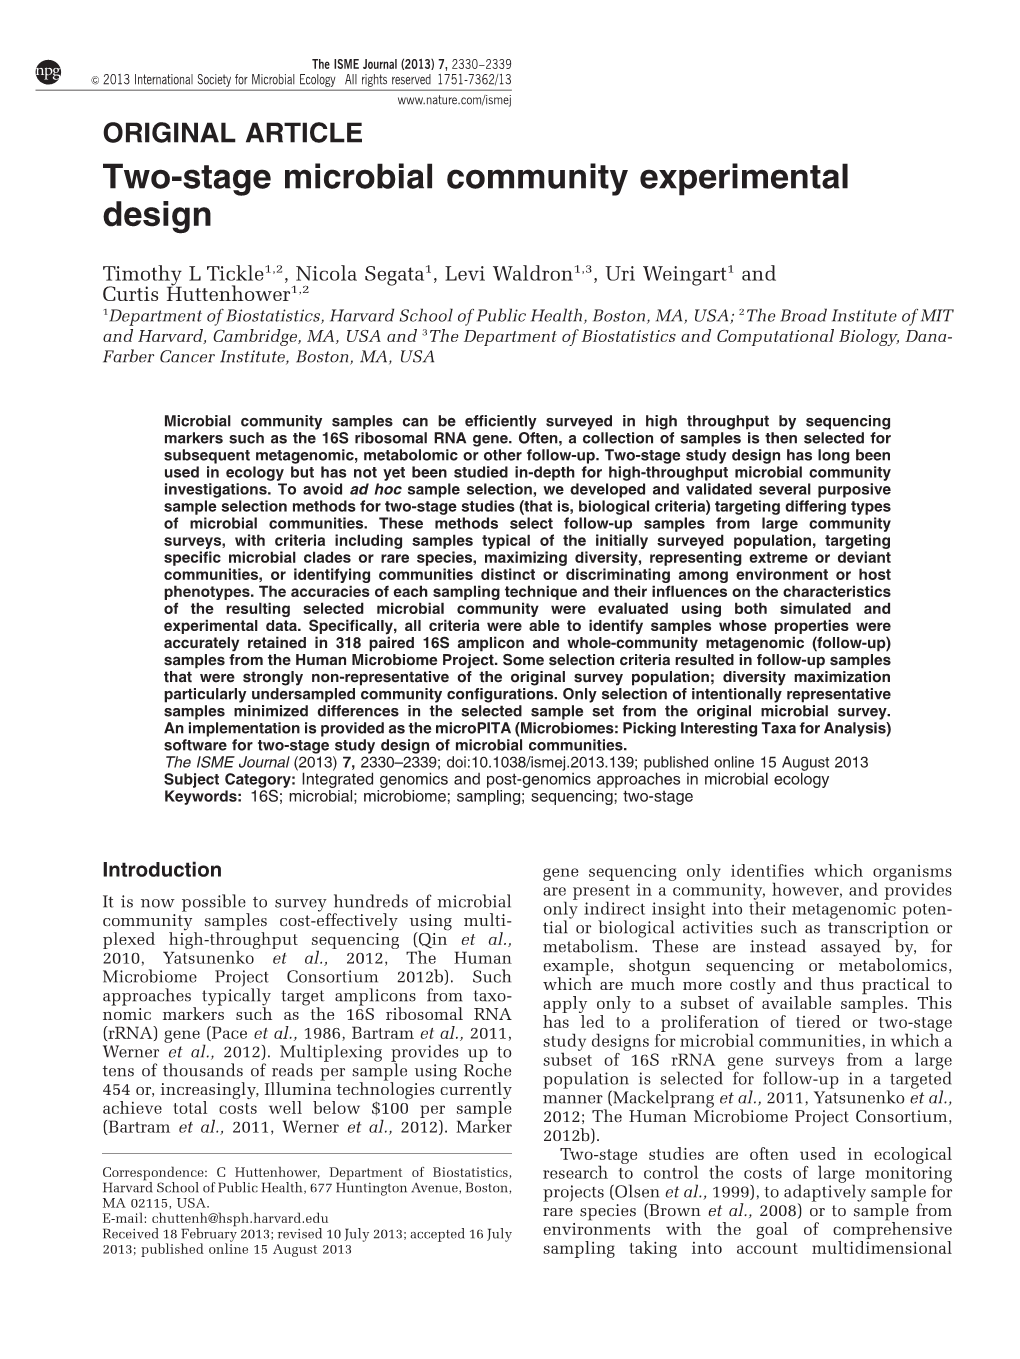 Two-Stage Microbial Community Experimental Design